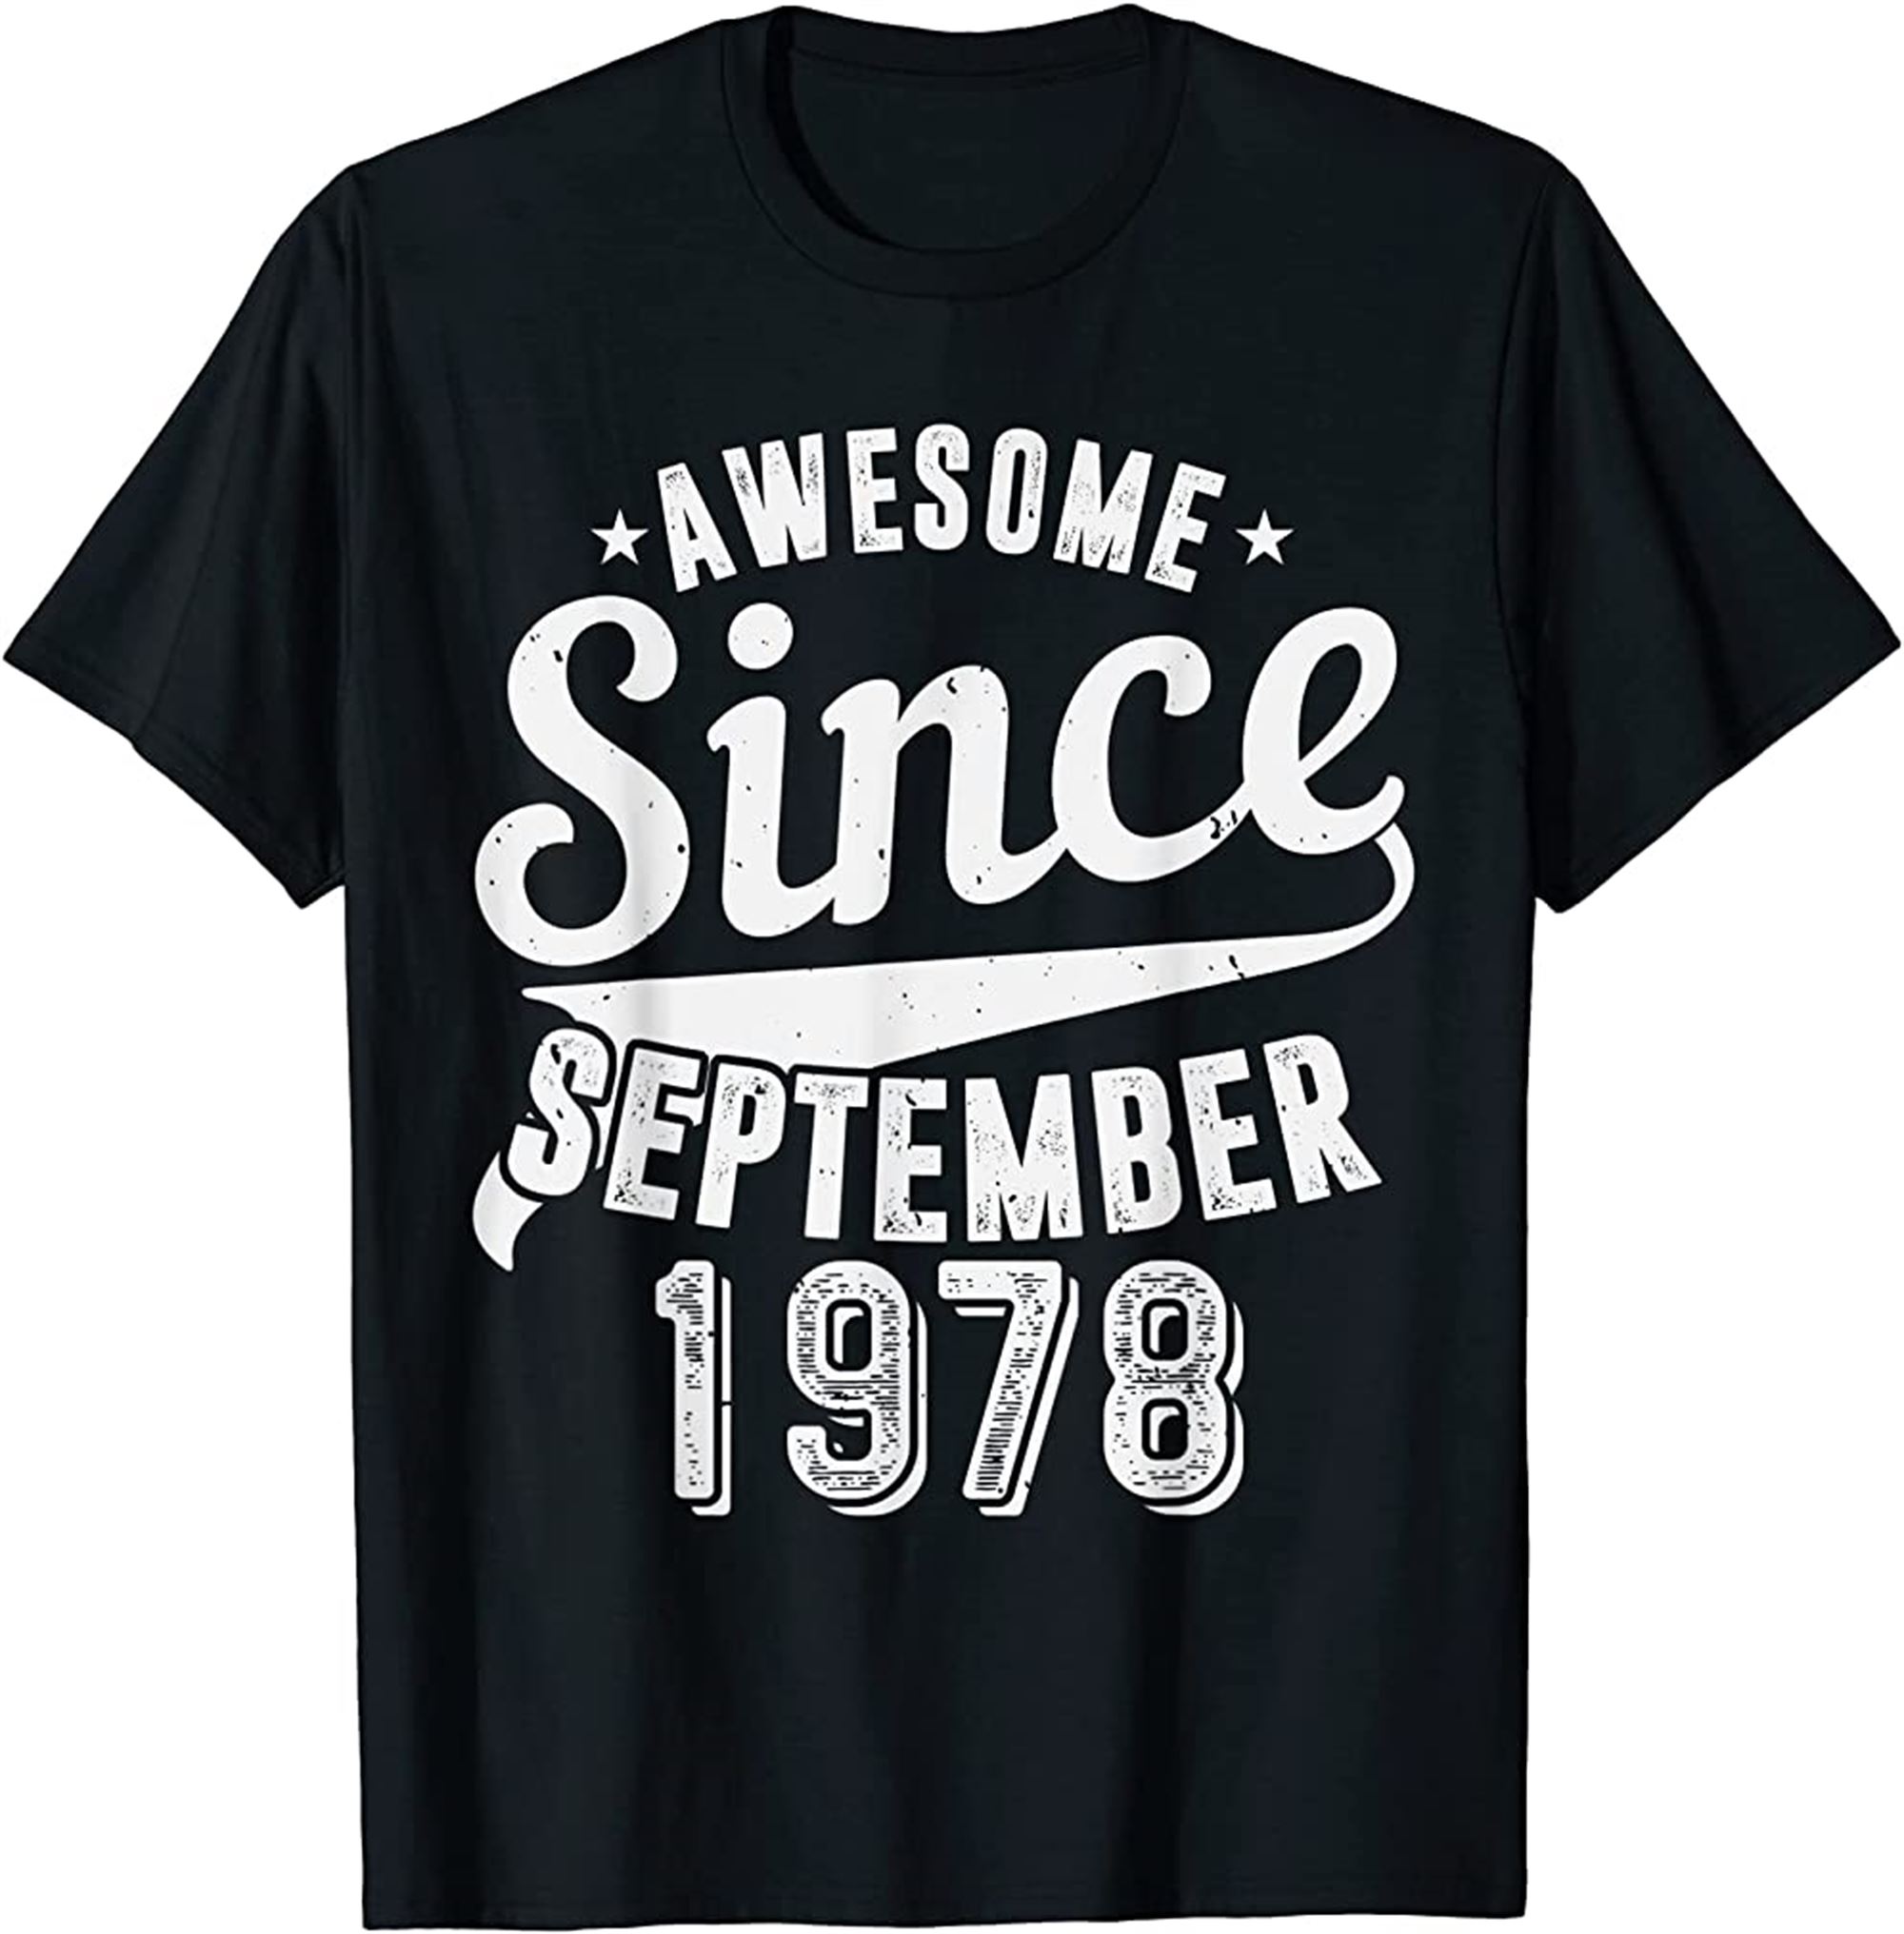 Vintage 1978 Awesome Since September Happy My 44th Birthday T-shirt Size Up To 5xl